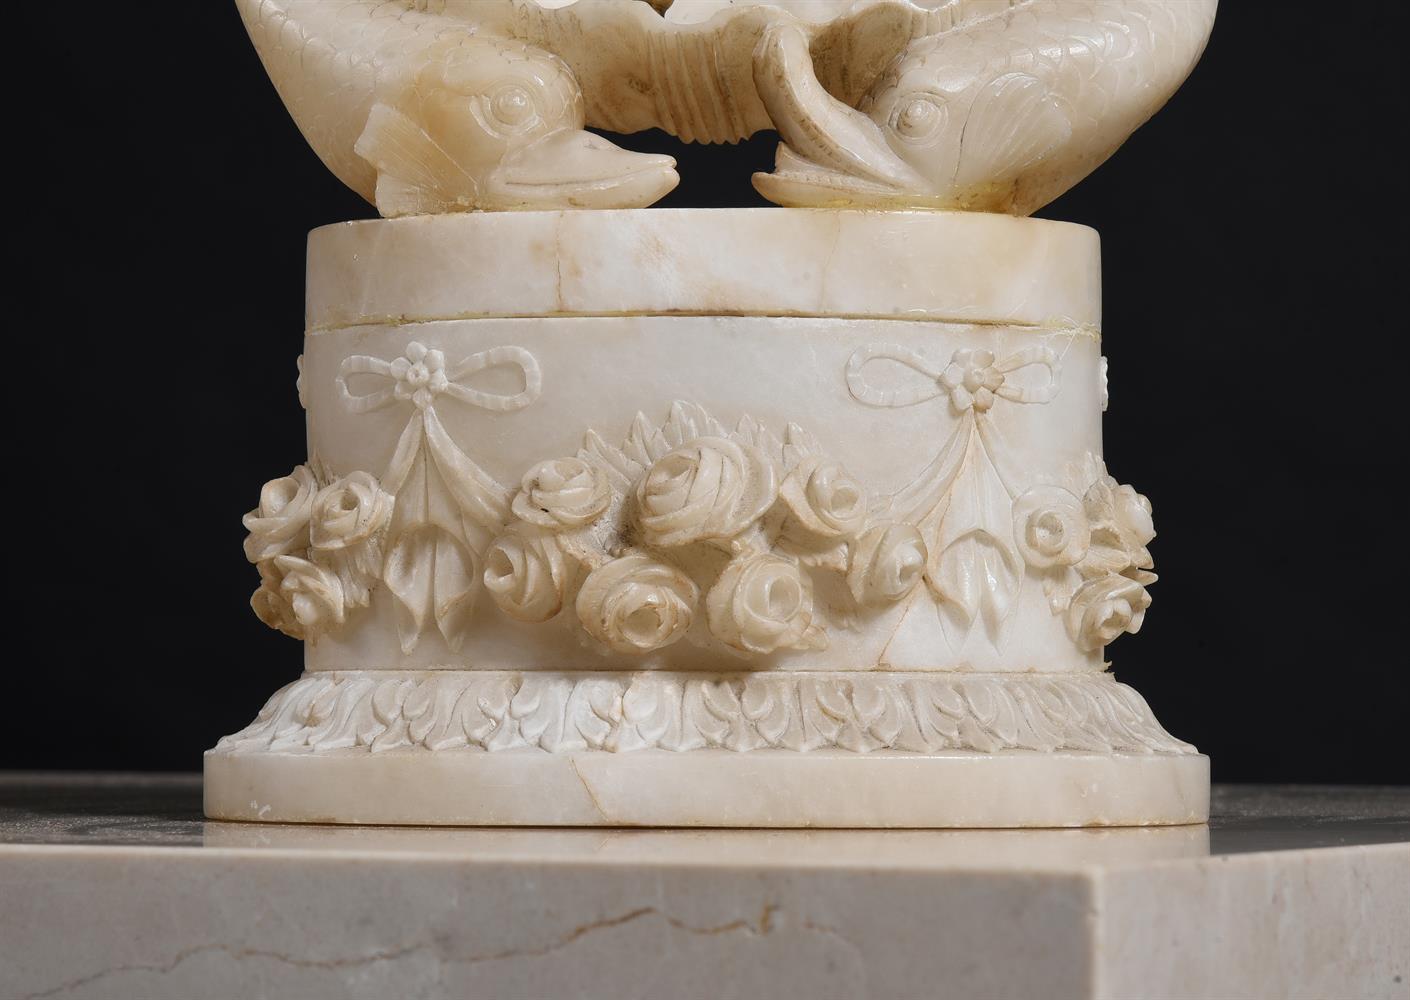 A SCULPTED ALABASTER SOAP DISH, 19TH CENTURY - Image 3 of 4